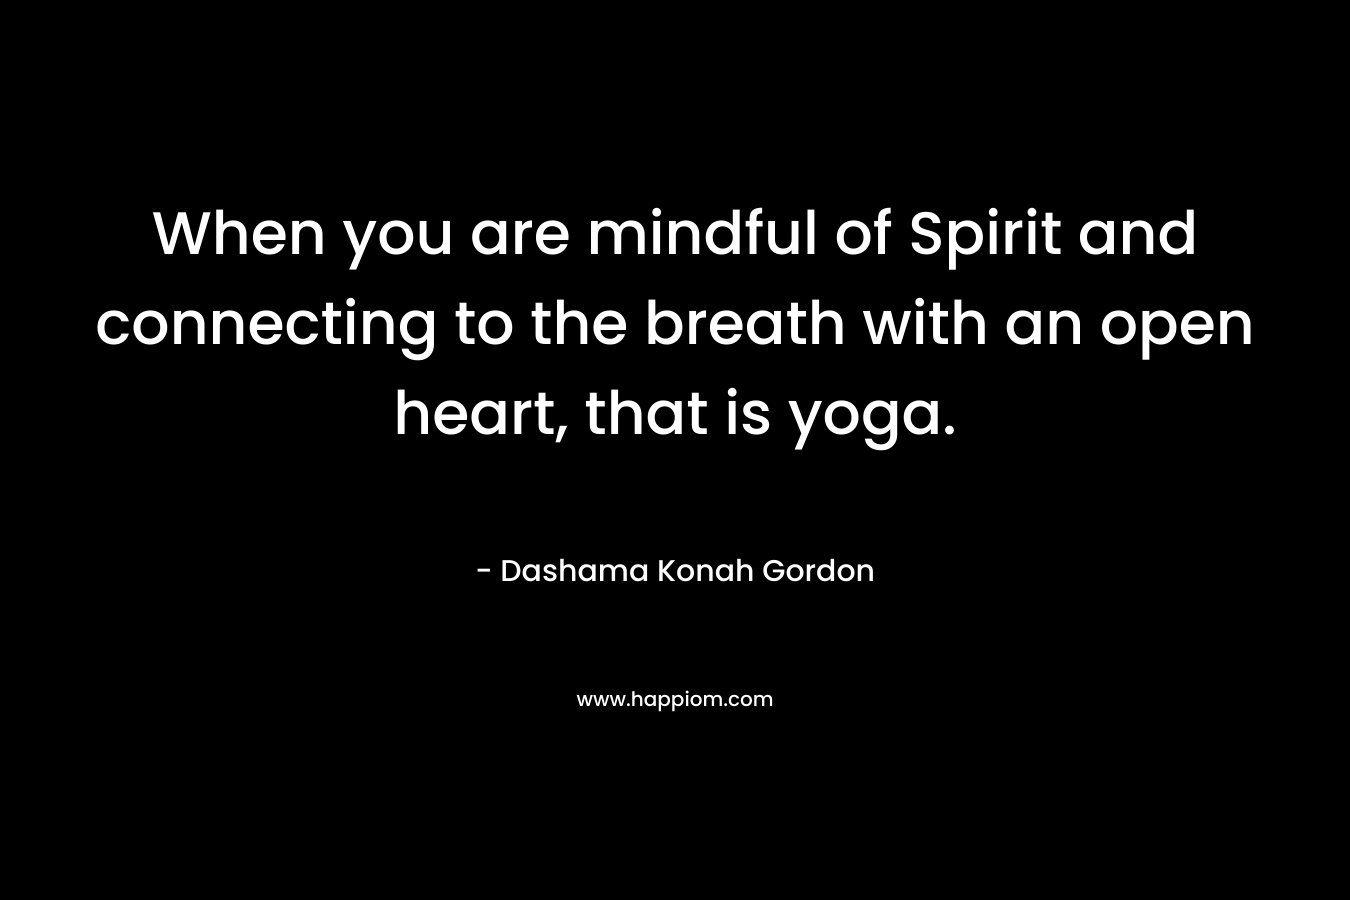 When you are mindful of Spirit and connecting to the breath with an open heart, that is yoga. – Dashama Konah Gordon